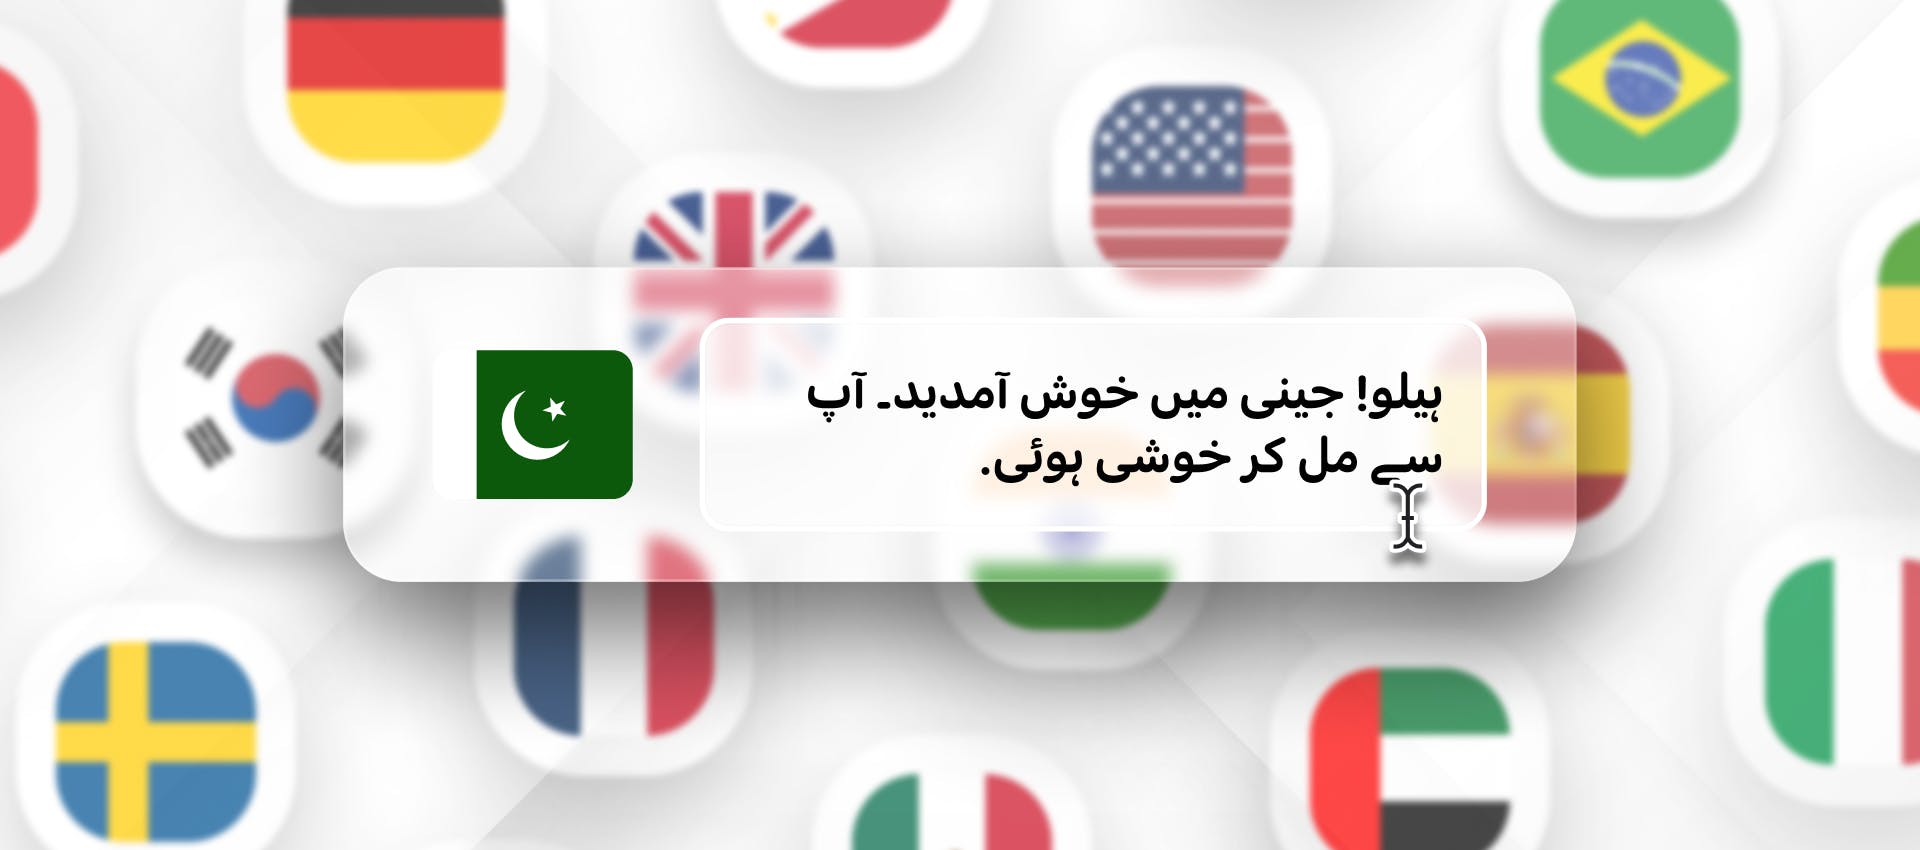 Urdu phrase for Urdu text to speech tool with background full of flags